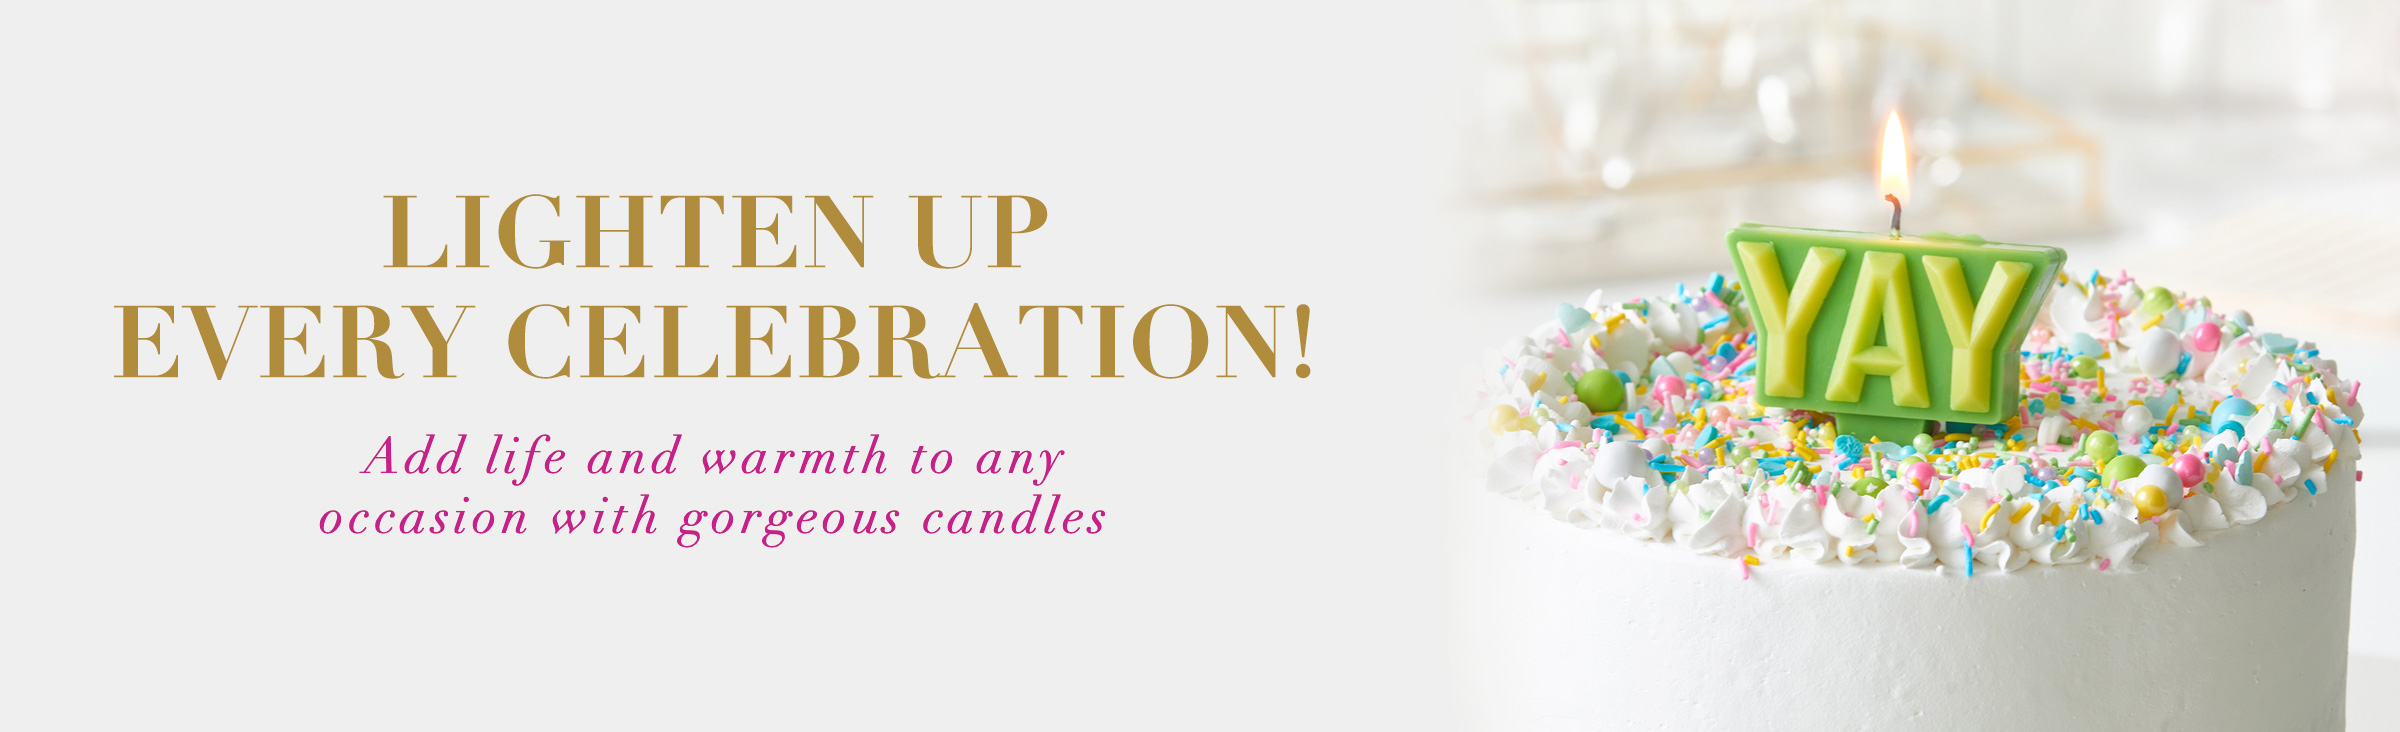 Lighten up every celebration! Add life and warmth to any occasion with gorgeous candles.